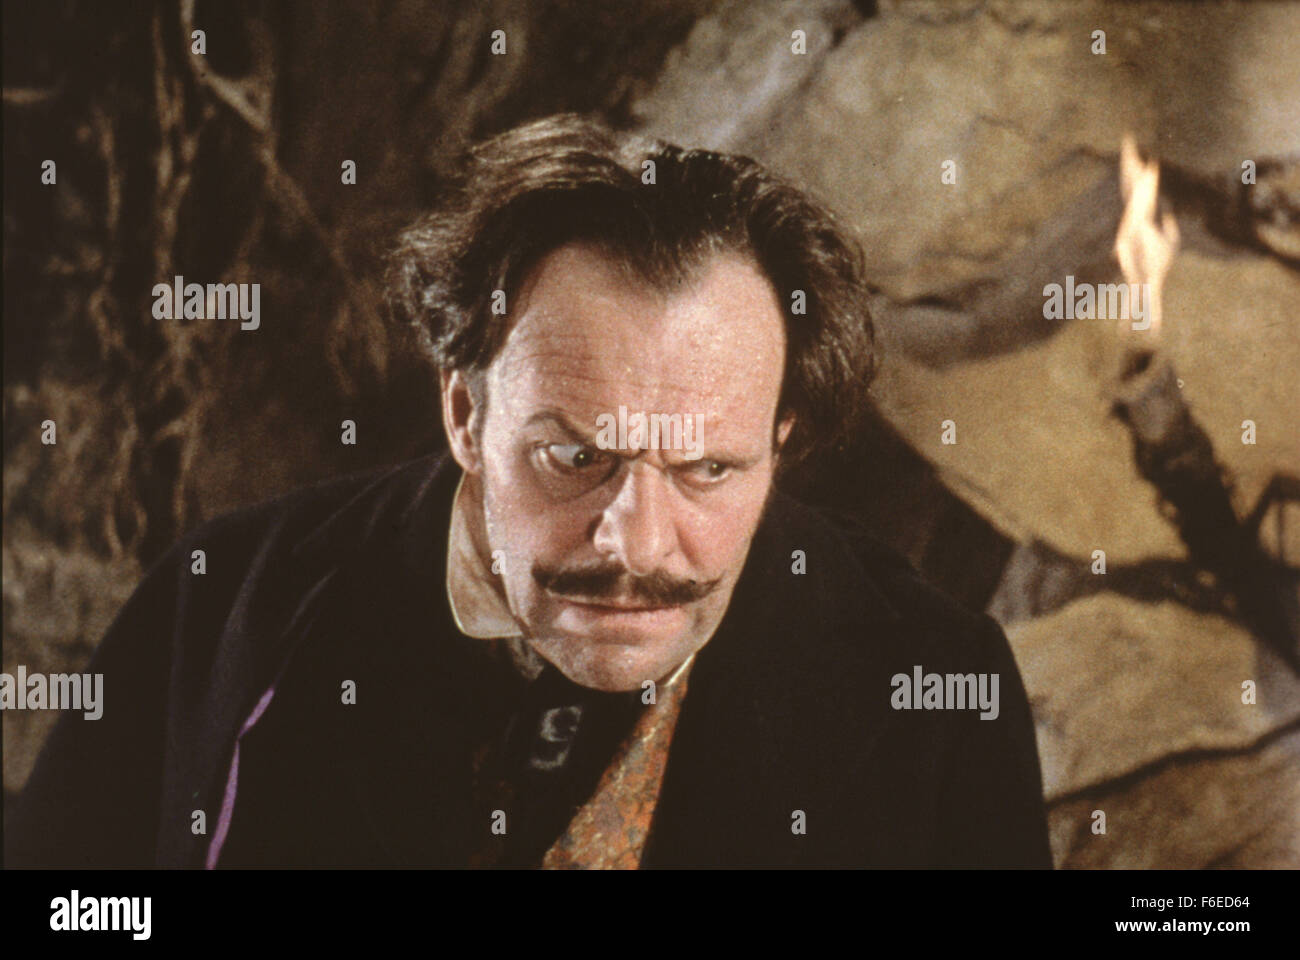 RELEASE DATE: December 22, 1958. MOVIE TITLE: Tom Thumb. STUDIO: Galaxy Pictures Limited. PLOT: . PICTURED: TERRY-THOMAS as Ivan. Stock Photo